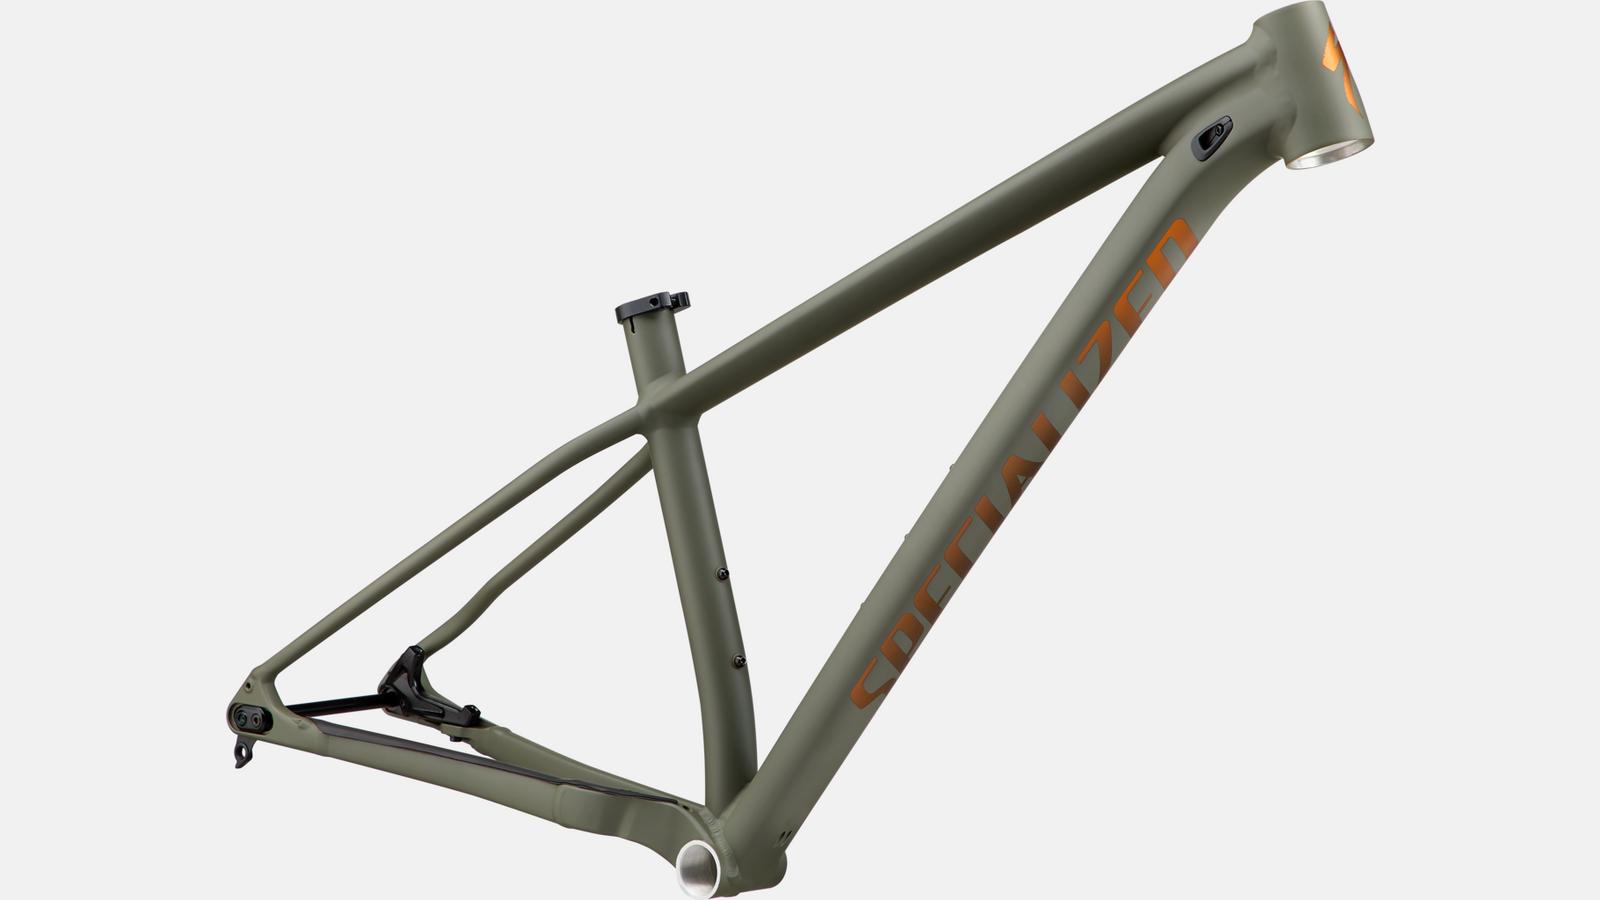 Touch-up paint for 2020 Specialized Fuse M4 Frameset - Satin Oak Green